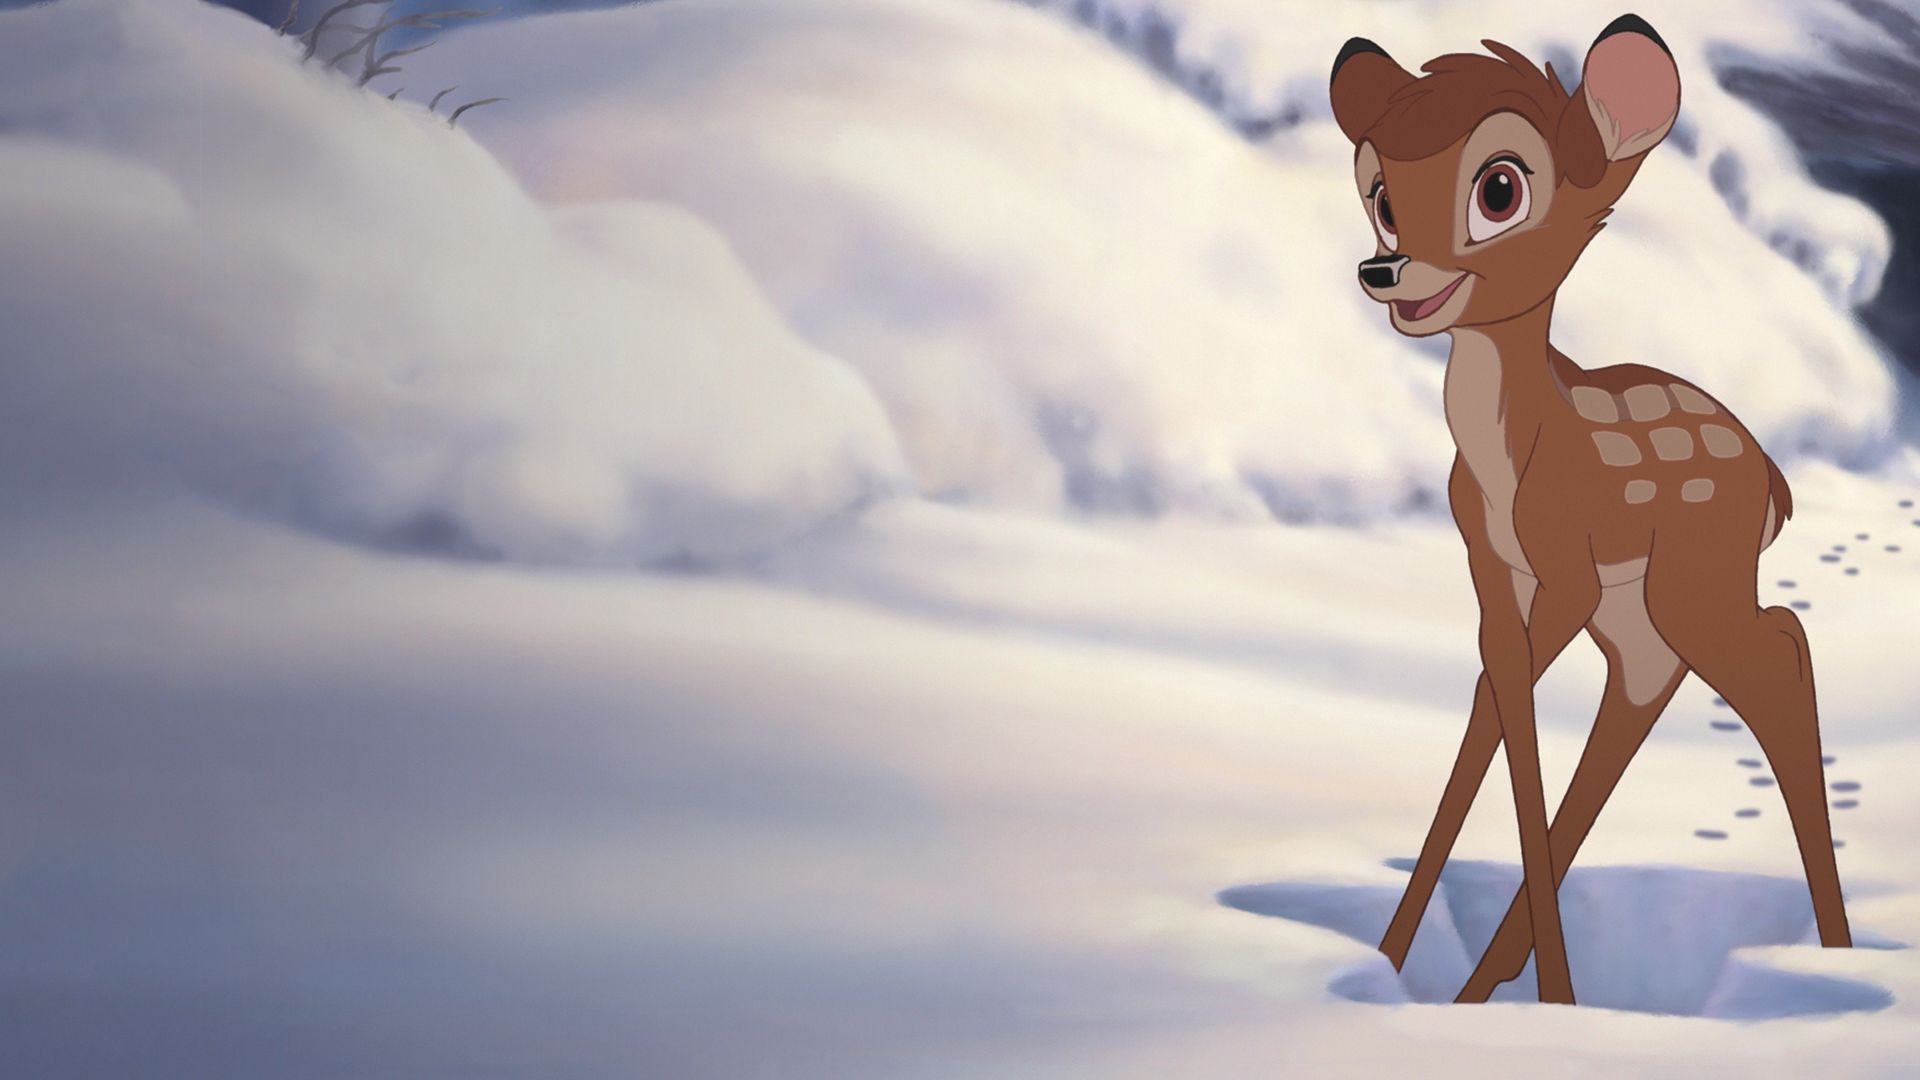 Bambi 2: The Great Prince of the Forest Backdrop